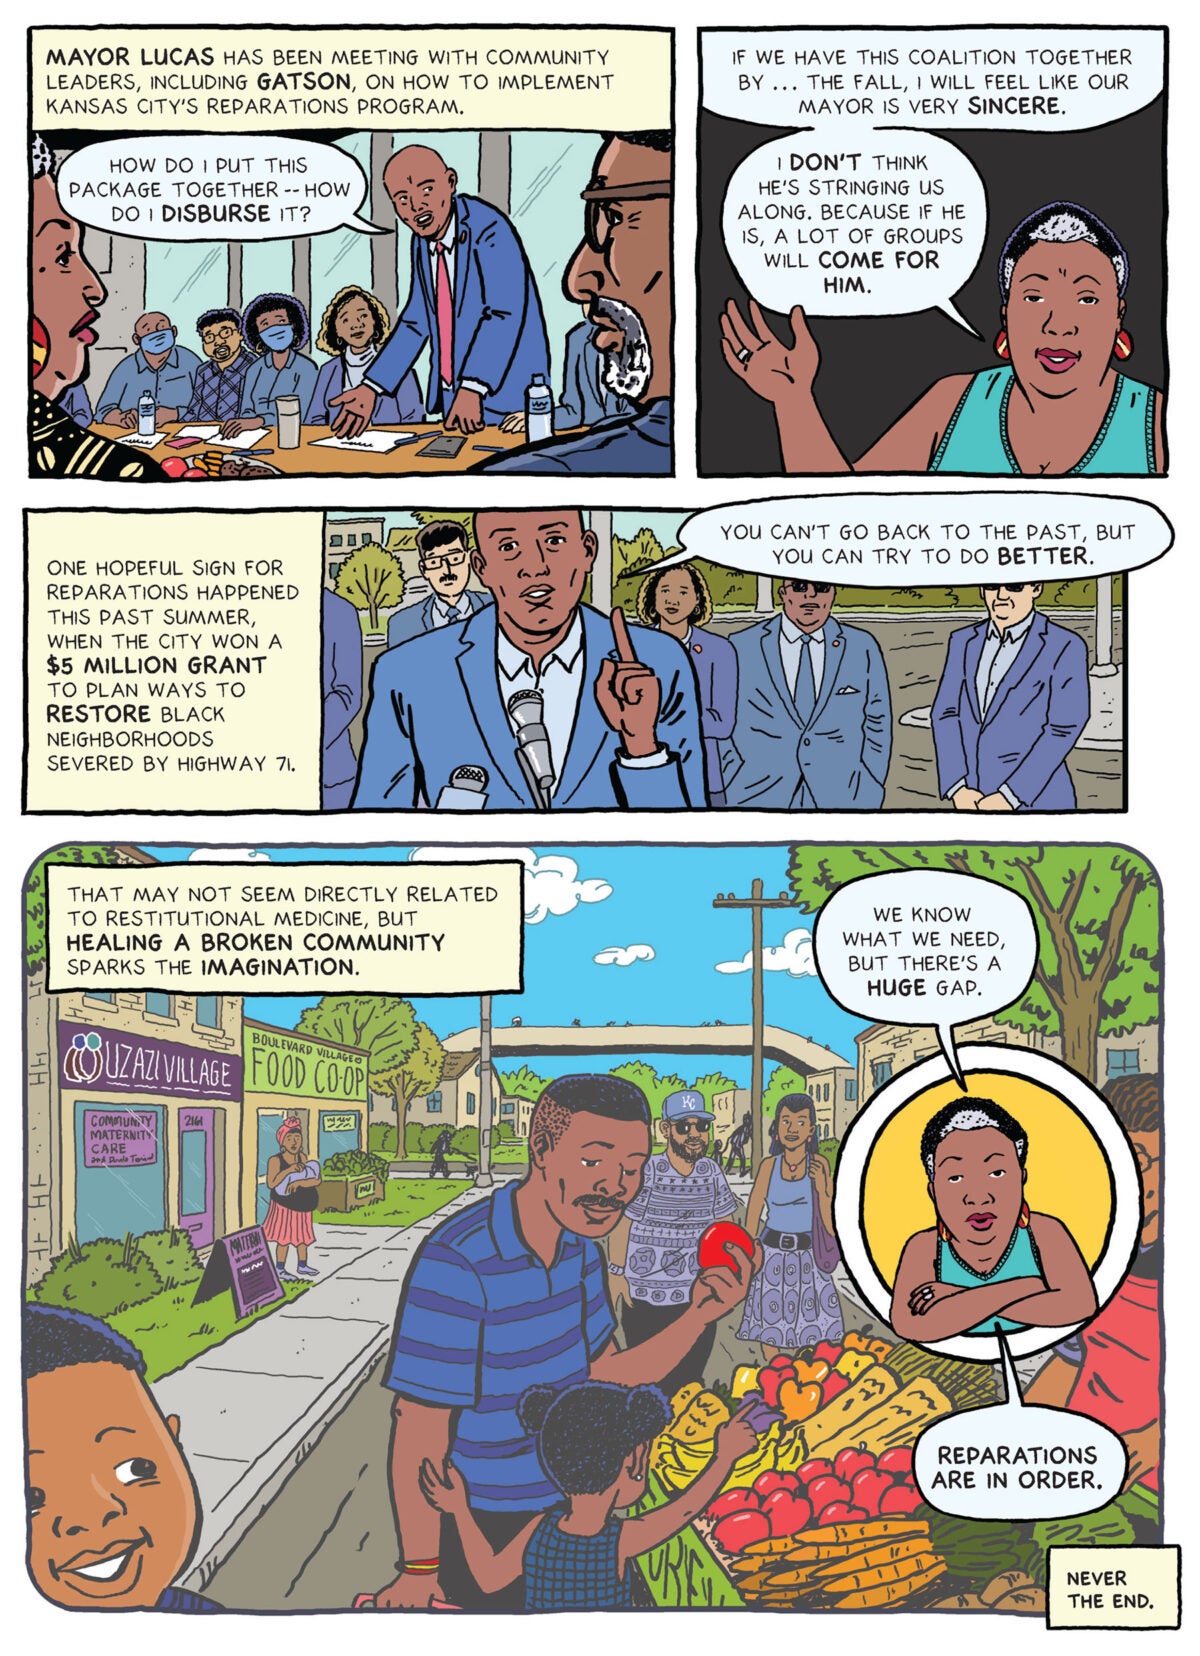 Image eight: Top left panel: Illustration of Mayor Lucas in blue suit and red tie in a meeting room with Justice Gatson and other Black community leaders. Lucas’s is standing while the rest of the group sits around him. His hands rest in an inquisitive gesture[FM1] . He says “How do I put this package together — how do I disburse it?" Top right panel: Justice Gatson waves her right hand and says “If we have this coalition together by the beginning of the fall, I will feel like our Mayor is very sincere. I don’t think he’s stringing us along. Because if he is, a lot of groups will come for him.” Middle panel: Text box reads “One hopeful sign for reparations happened this past summer, when the city won a $5 million grant to plan ways to restore Black neighborhoods severed by Highway 71.” Illustration of Mayor Lucas at an intersection, in front of several other men and women in official-looking dark suits. Speaking into a reporter’s microphone, Lucas, who is holding up his right hand, index finger pointed at the sky, says “You can’t go back to the past, but you can try to do better.” Bottom panel: Text box says: “That may not seem directly related to restitutional medicine, but healing a broken community sparks the imagination. Illustration in softer tones of what the Kansas City neighborhood from the start of the story might look like after reparations: a farmer’s market with fresh produce, Black families and couples, including a man in a Kansas City Royals baseball cap, examining fresh apples, clean streets and sidewalks, and in the background various people out and about. The liquor store is imagined as being replaced by a maternal health clinic next to a market. Inset illustration of Gatson, arms crossed, looking determined. She says “We know what we need, but there’s a huge gap. Reparations are in order.” Text box reads: “Never the end.”